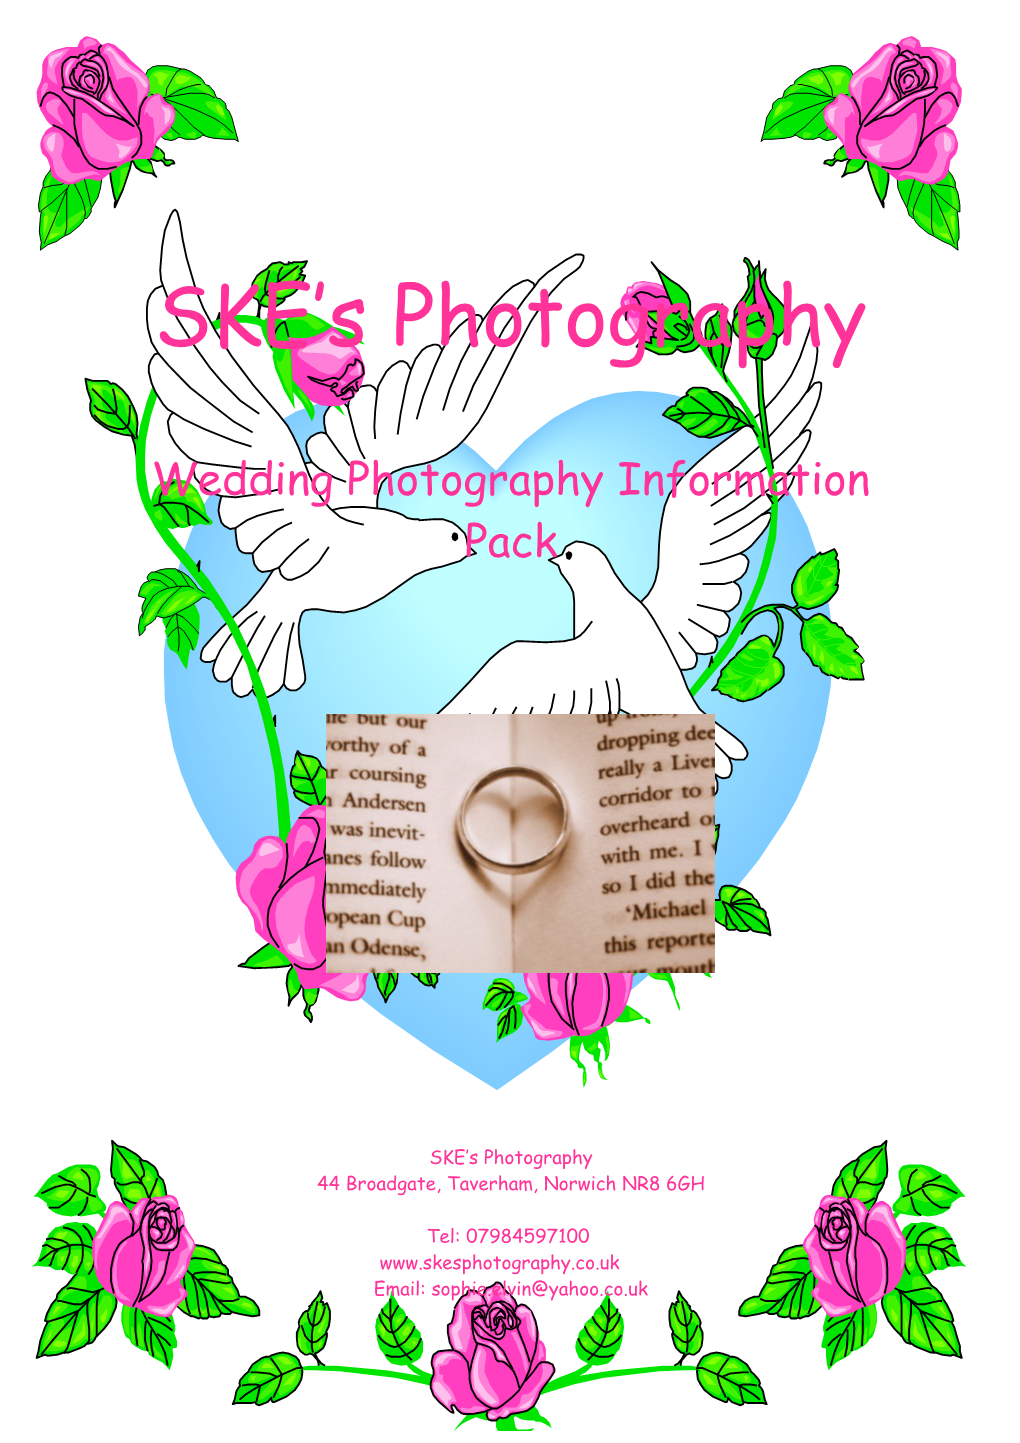 Wedding Photography Information Pack